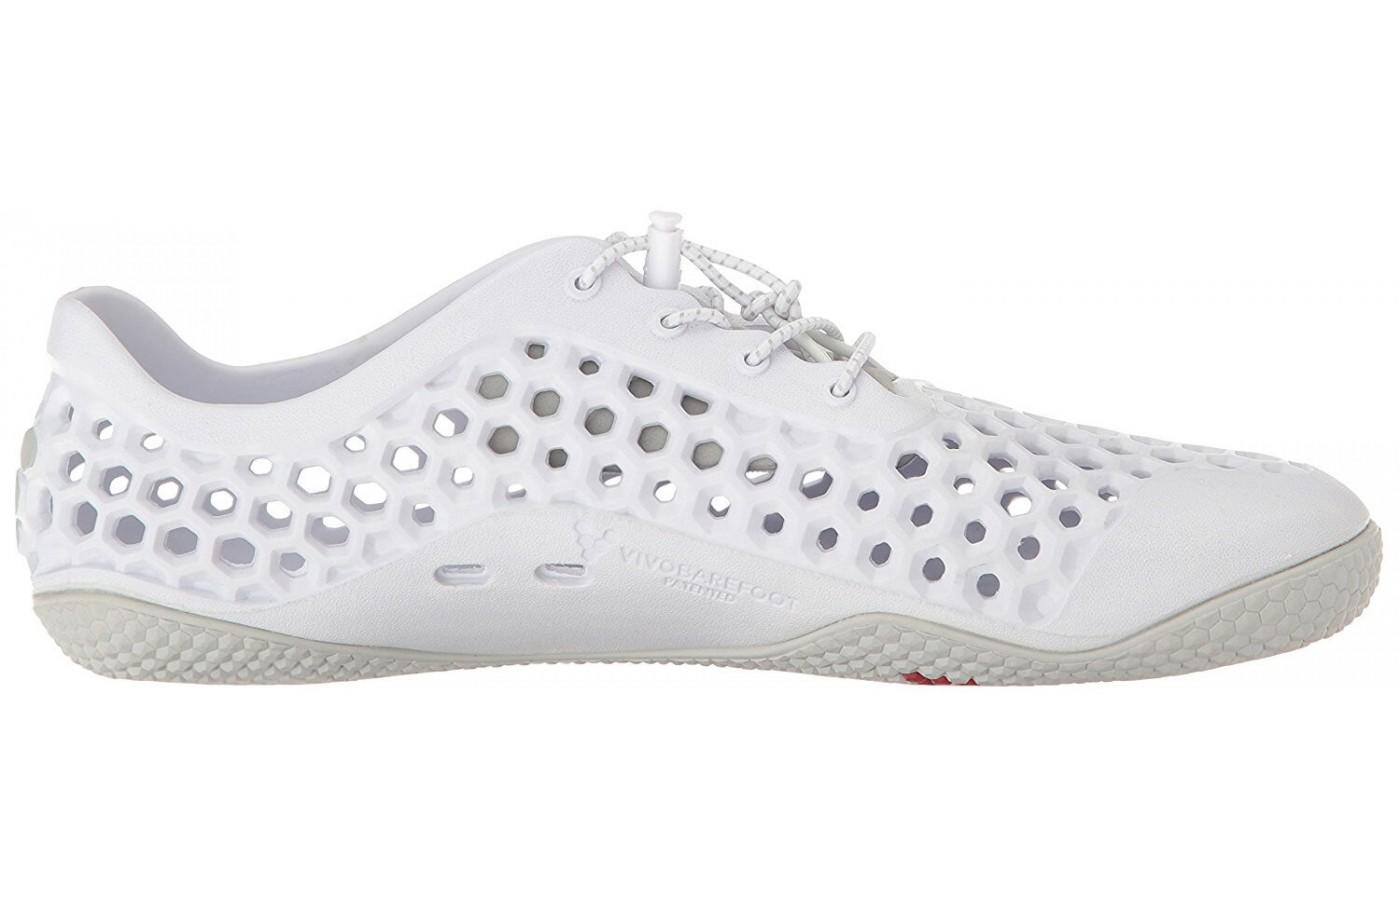 here is a side view of the vivobarefoot ultra 3